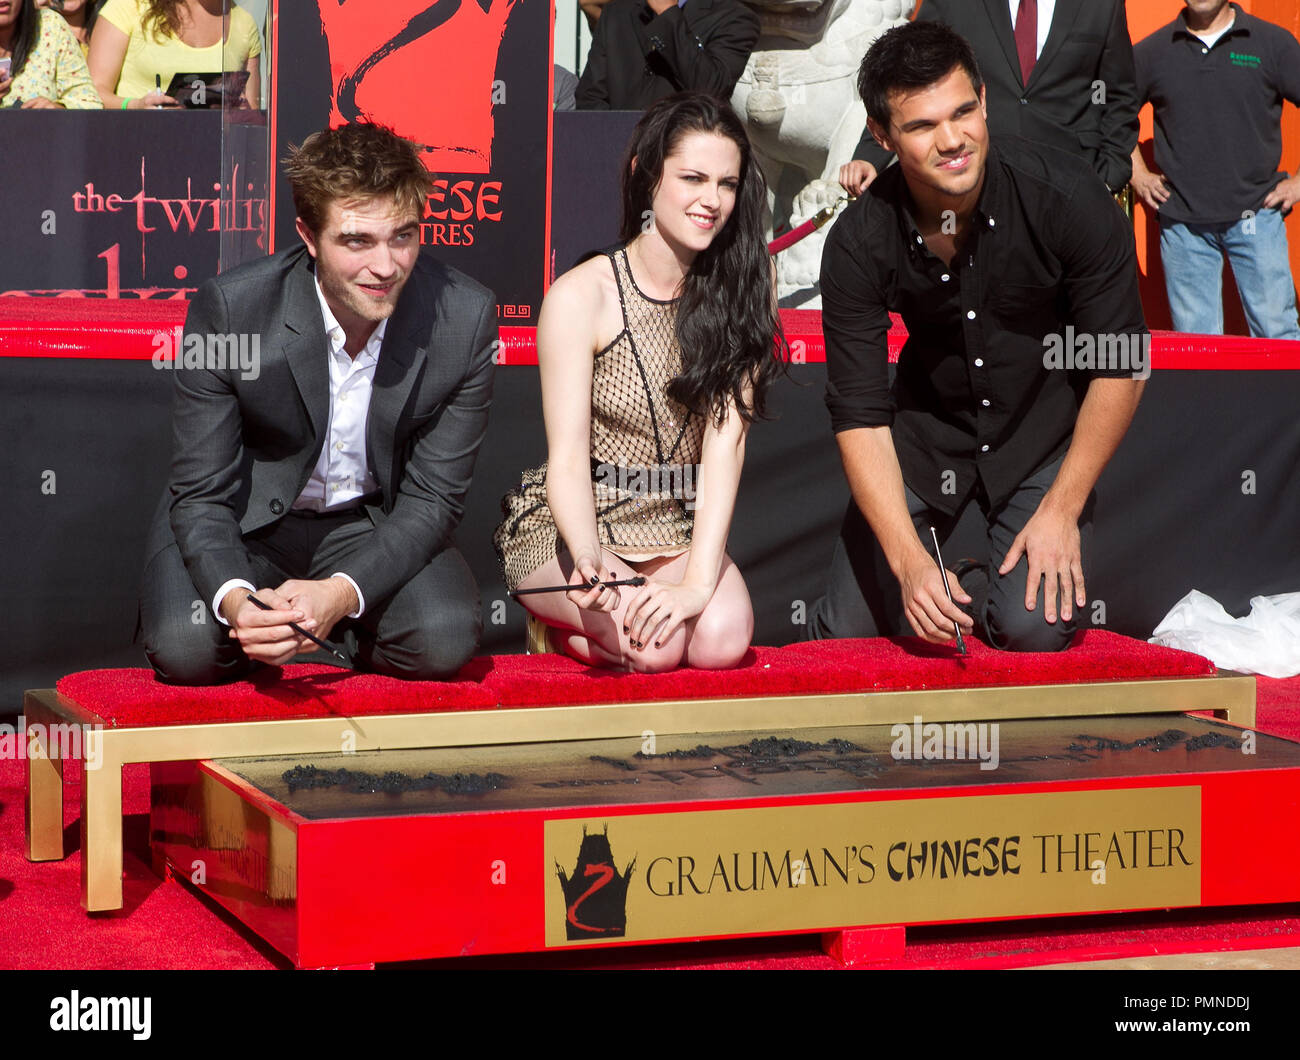 Robert Pattinson, Kristen Stewart & Taylor Lautner at the 'Twilight' Trio Robert Pattinson, Kristen Stewart and Taylor Lautner Hand And Footprint Ceremony held at Grauman's Mann Chinese Theatre in Hollywood, CA. The event took place on Thursday, November 3, 2011. Photo by John Salangsang/ PRPP/ PictureLux Stock Photo